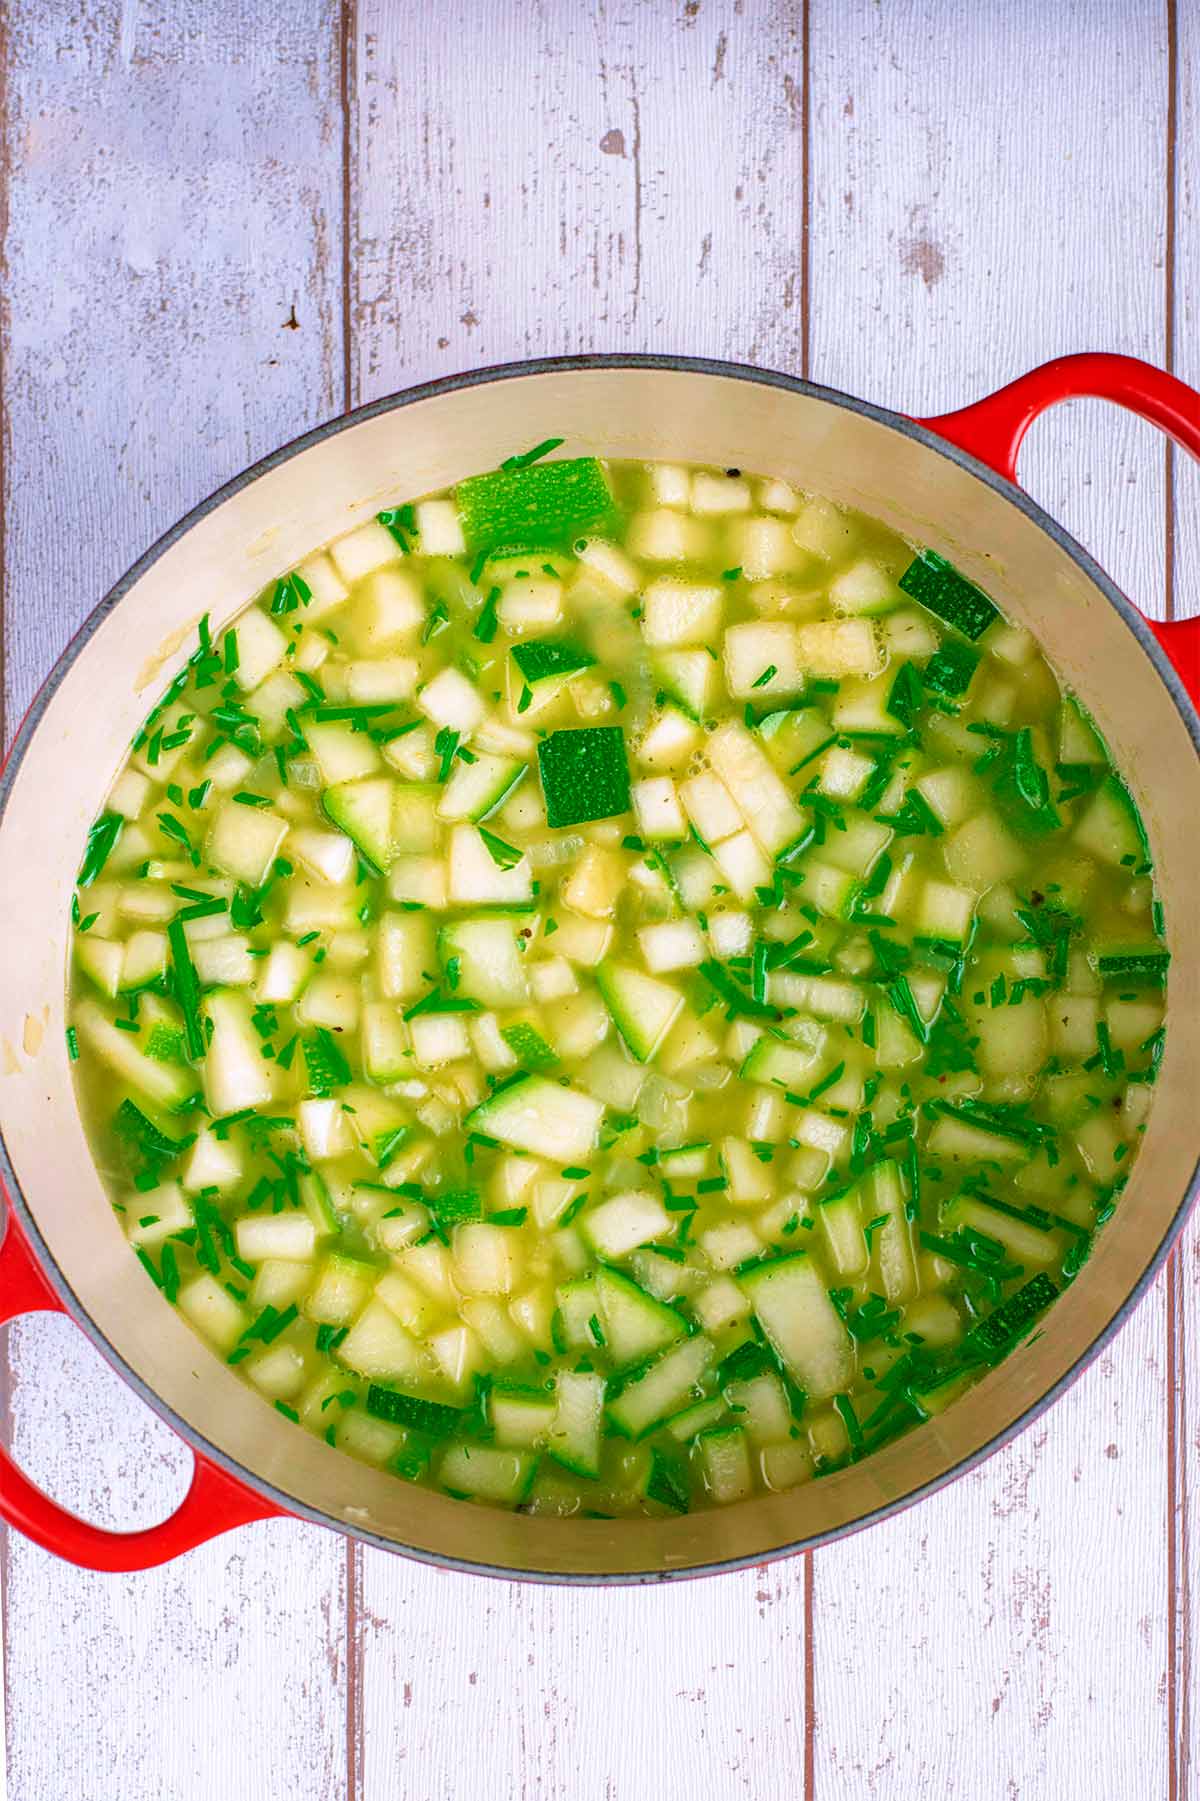 Chopped courgette, onions and stock in a larger red pan.